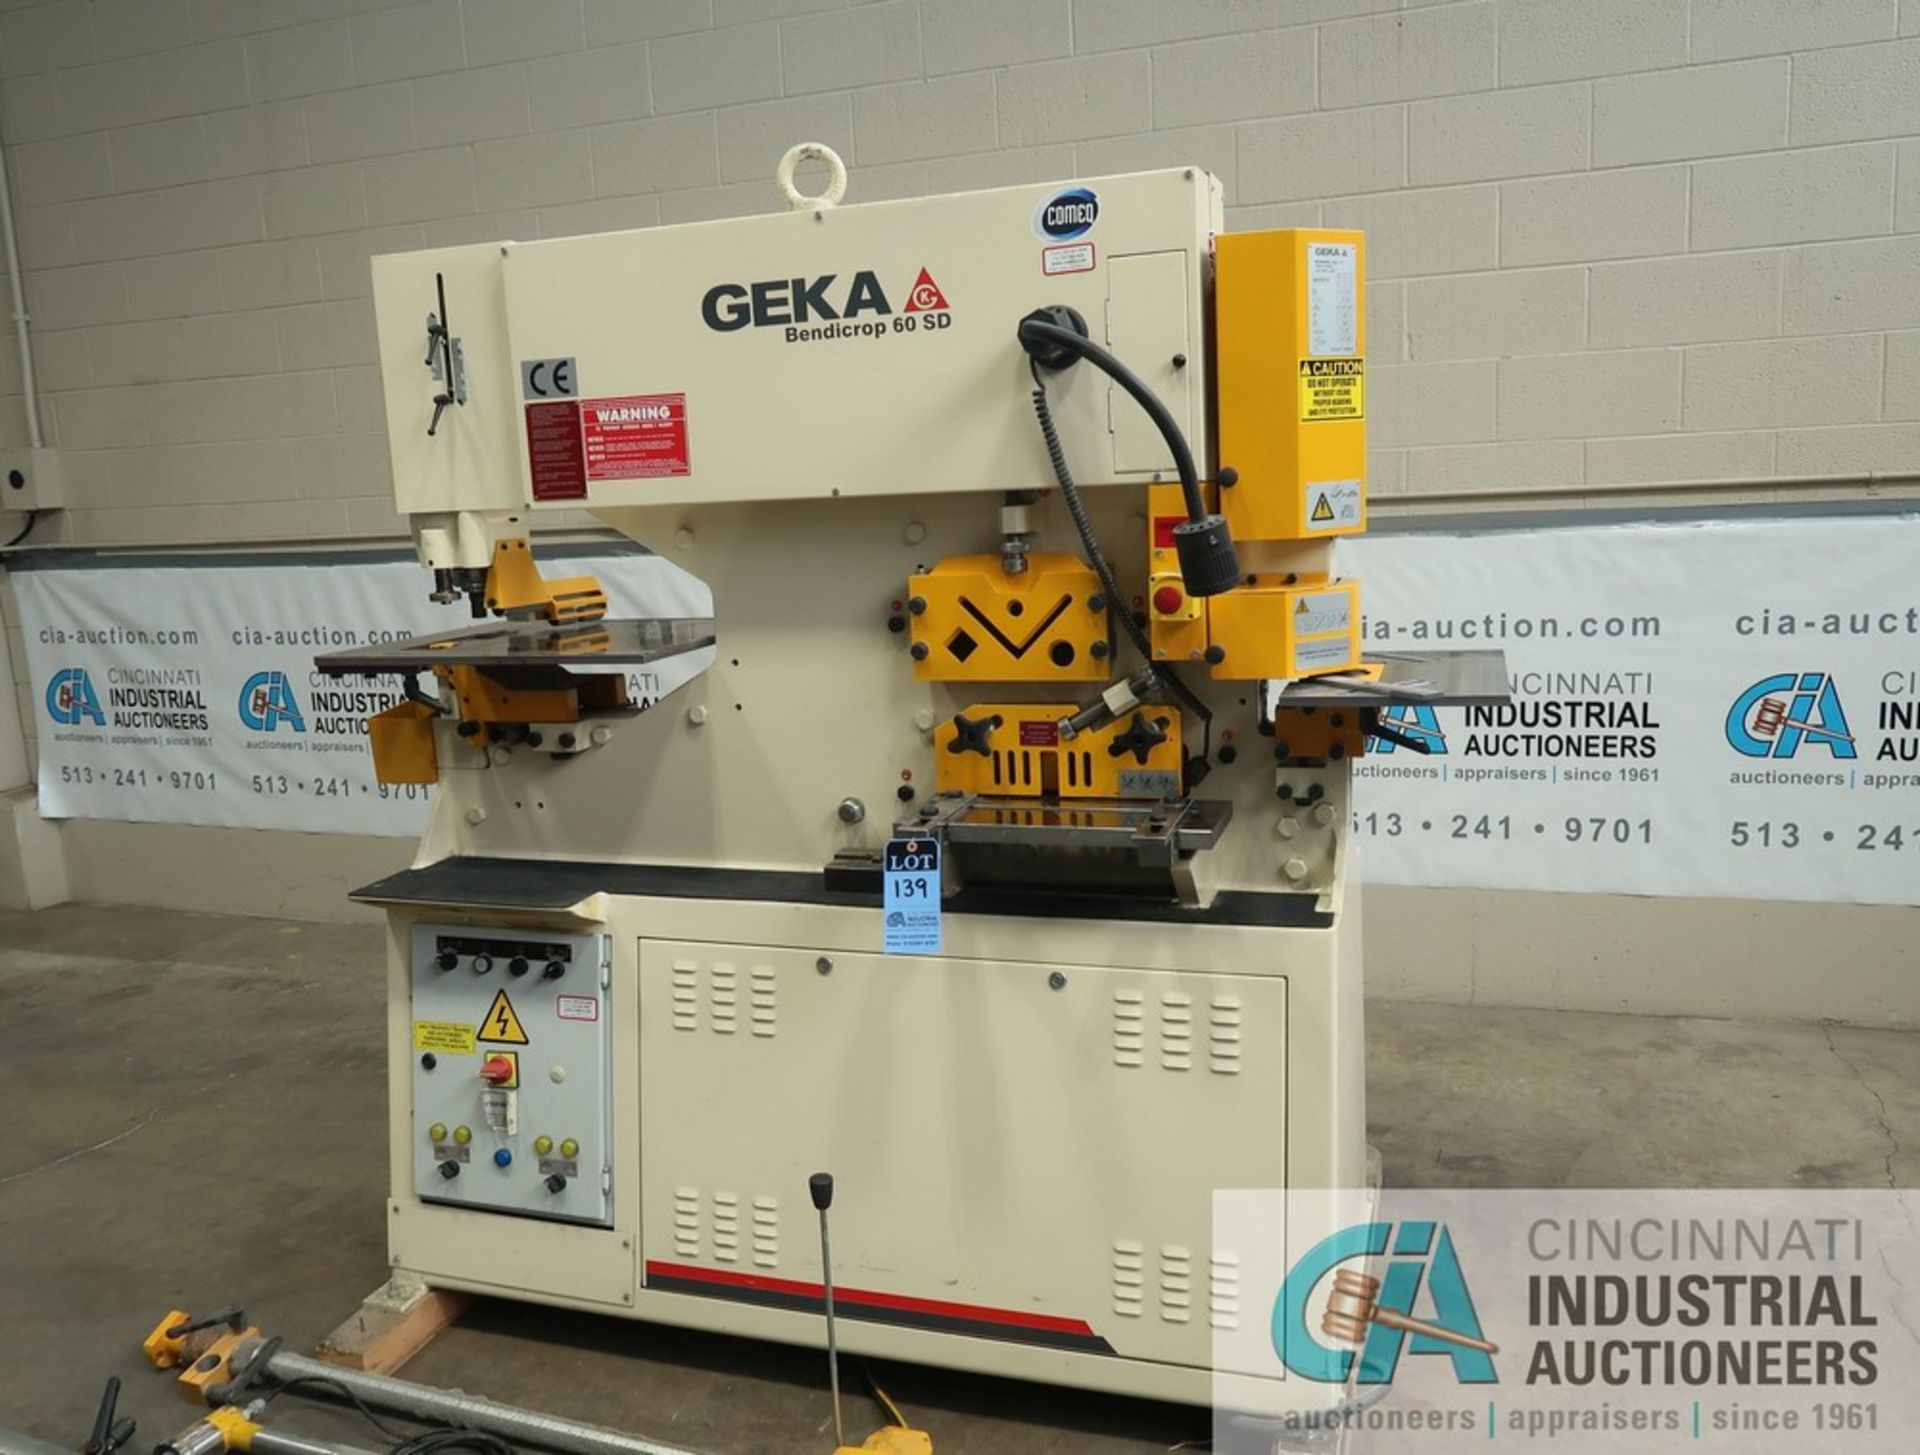 2017 GEKA MODEL BENDICROP 60SD HYDRAULIC IRONWORKER - New never put in service; S/N 168718 (NEW